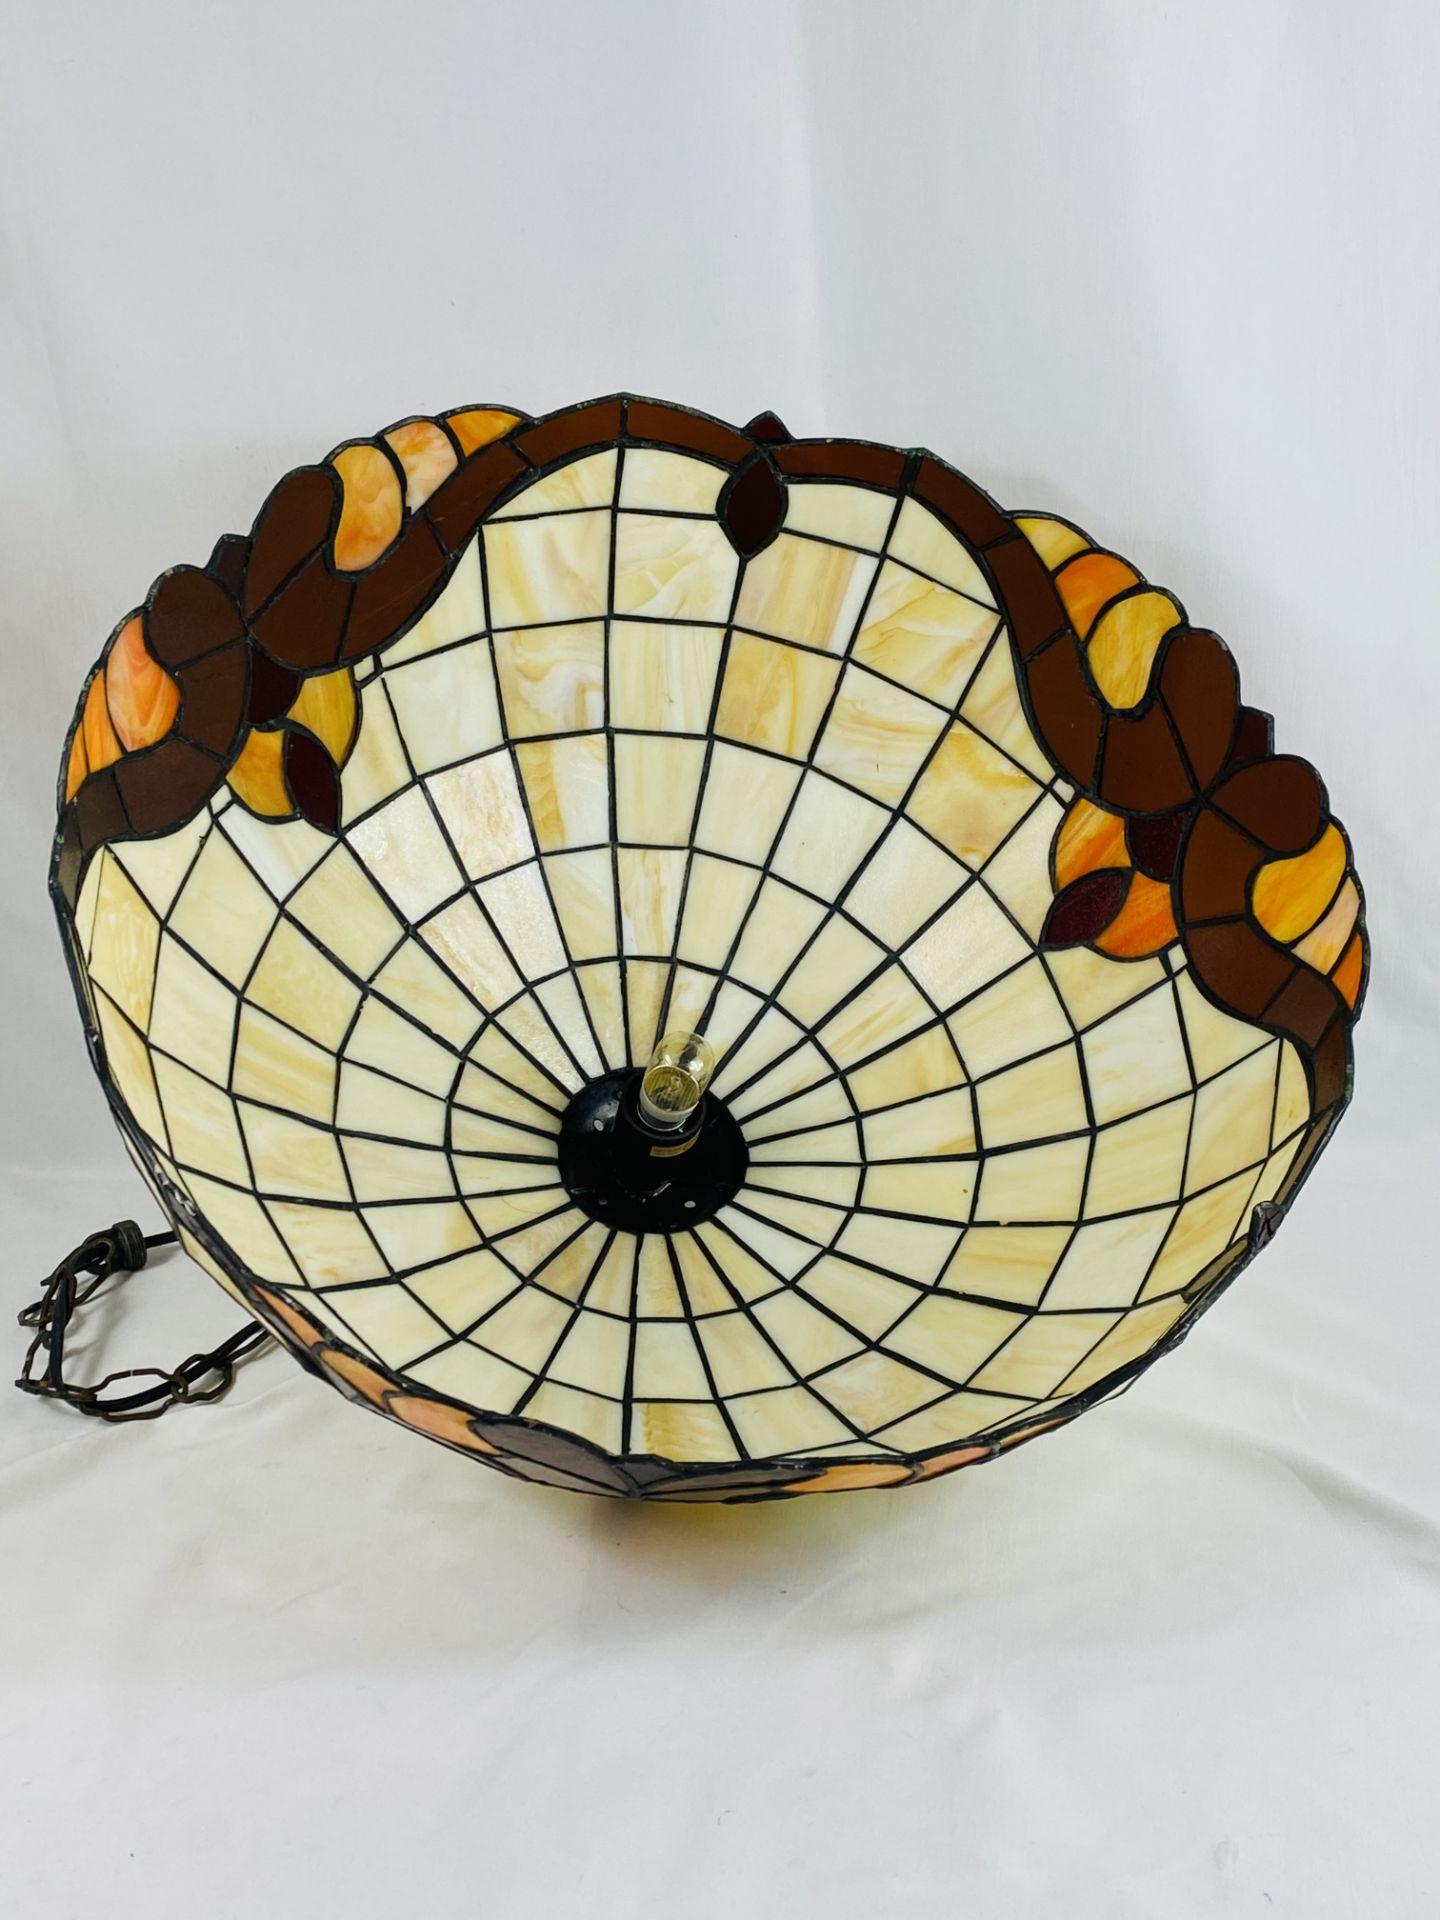 Tiffany style ceiling lamp - Image 3 of 6